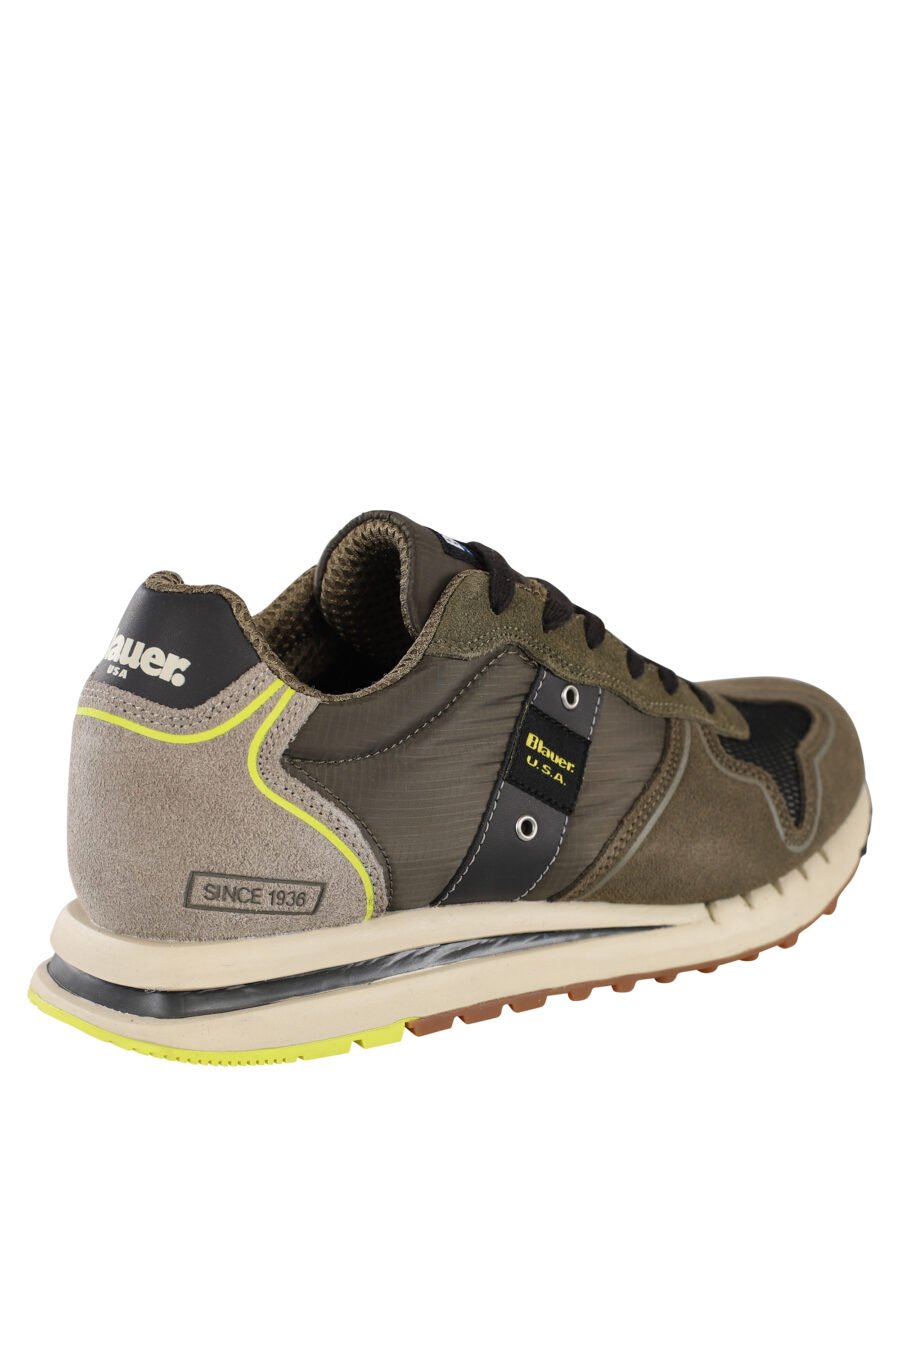 Trainers "quartz" multicoloured military green with breathable mesh - IMG 6833